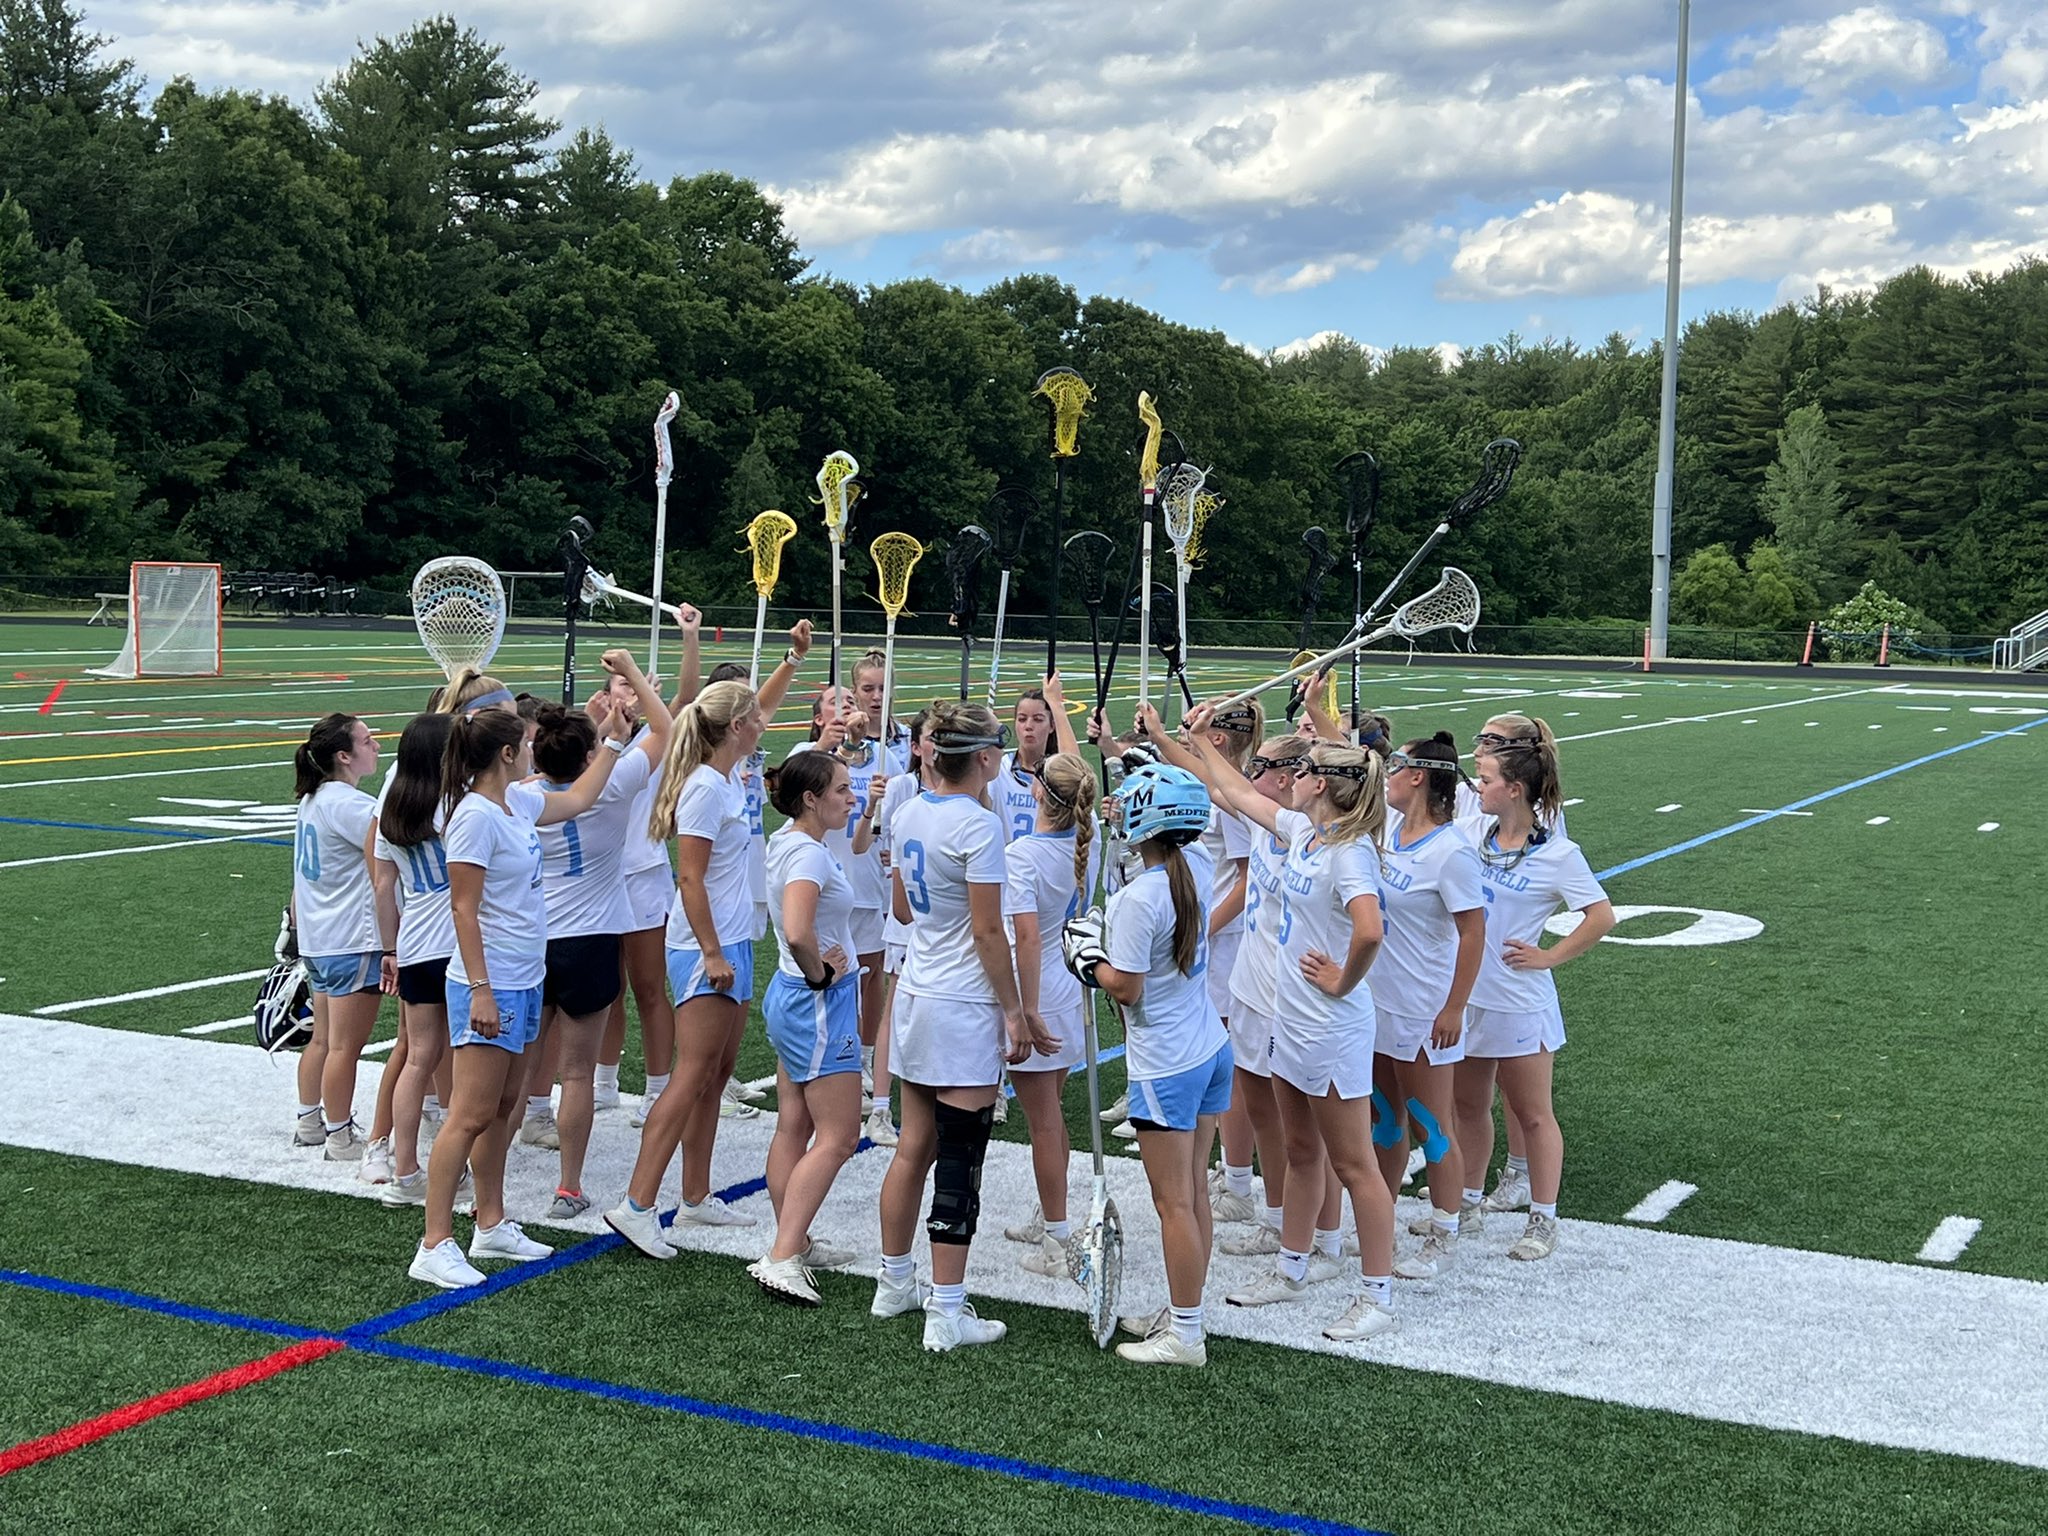 A team of Lacrosse players cheering together